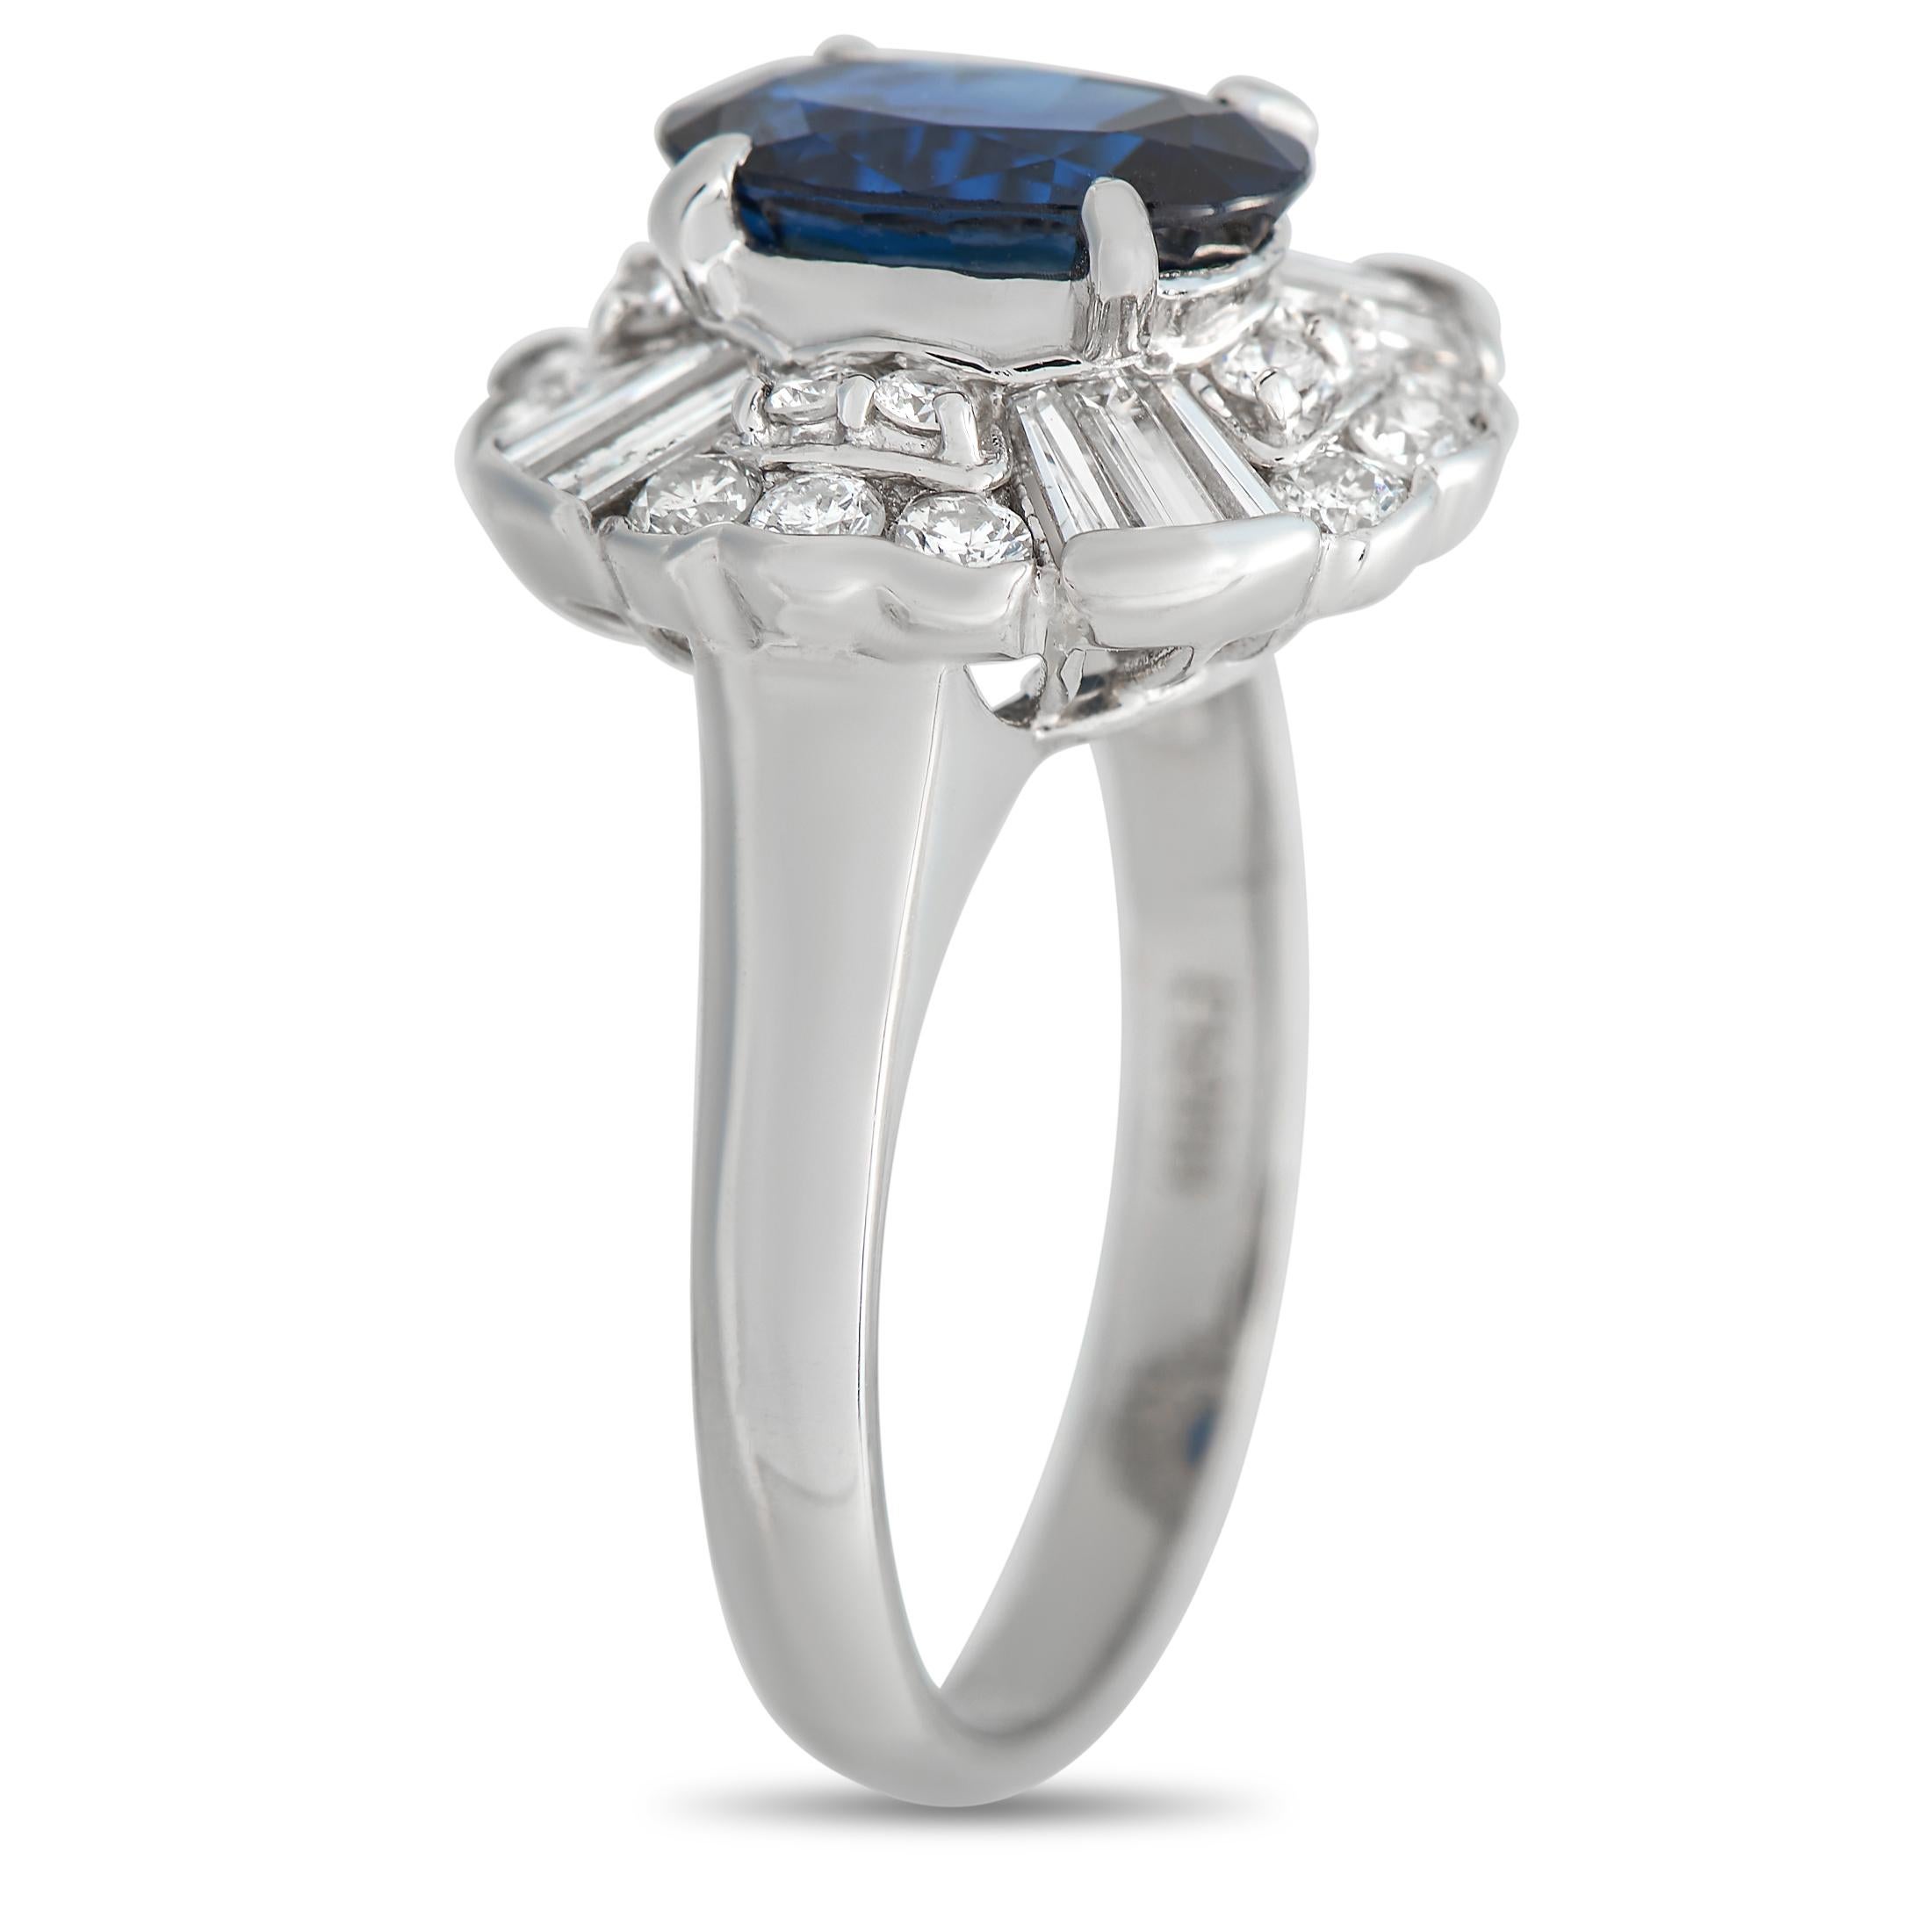 A captivating 2.07 carat sapphire center stone serves as a stunning focal point of this classically elegant ring. Surrounding the center stone, an exquisite array of sparkling diamonds totaling 0.82 carats further elevates the platinum setting. This